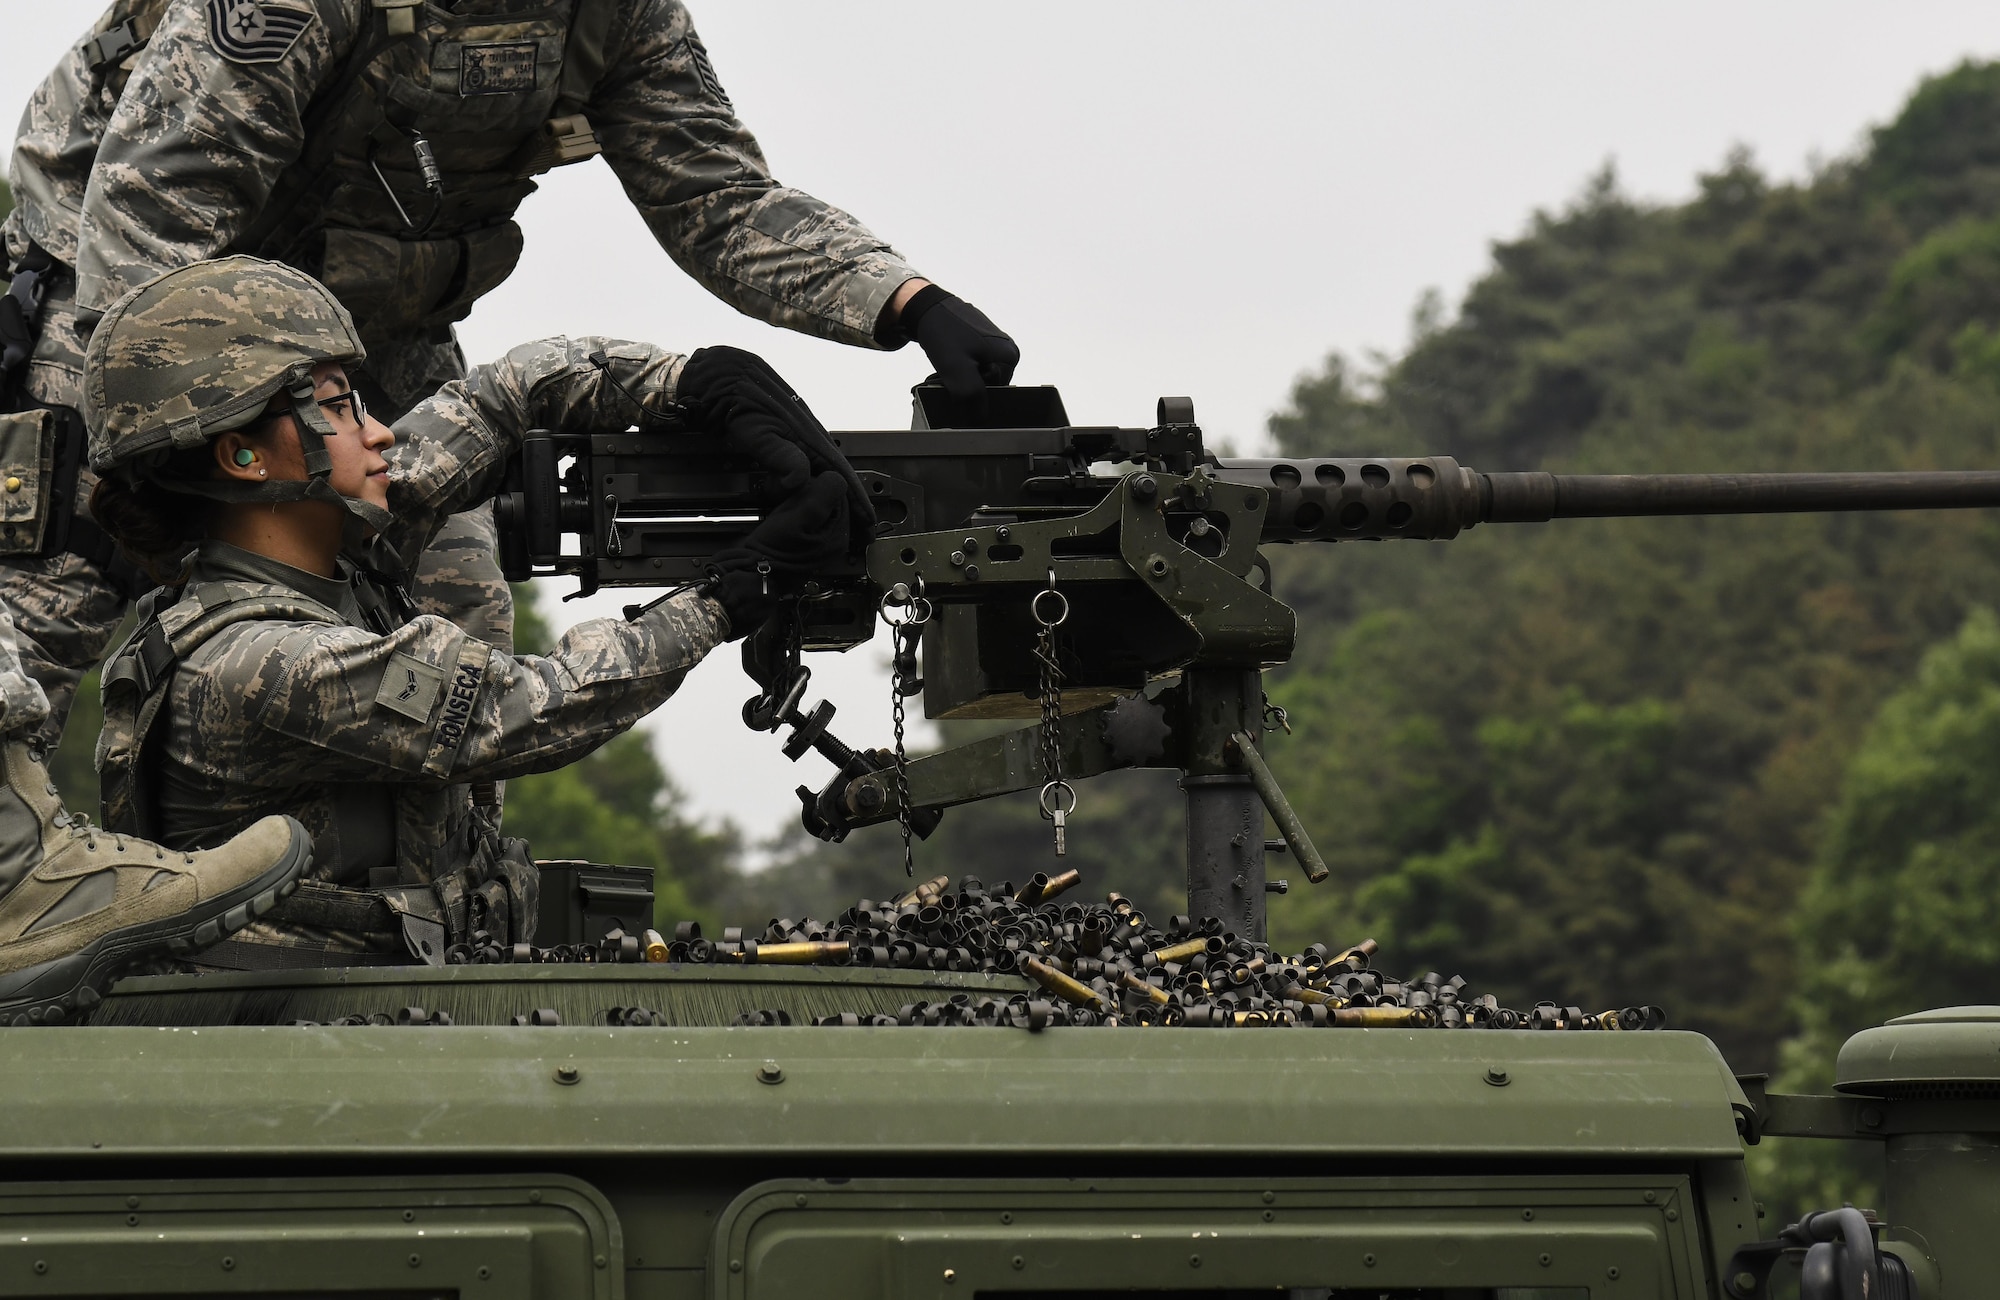 U.S. Air Force Airman 1st Class Jocelyn Fonseca, 8th Security Forces Squadron defender, charges the M2 machine gun during a weapons qualification training at Camp Rodriguez, Republic of Korea, May 23, 2017. Defenders from both the 51st and 8th SFSs participated in the training together to ensure both teams are ready to employ weapons systems at a moment’s notice. (U.S. Air Force photo by Airman 1st Class Gwendalyn Smith)